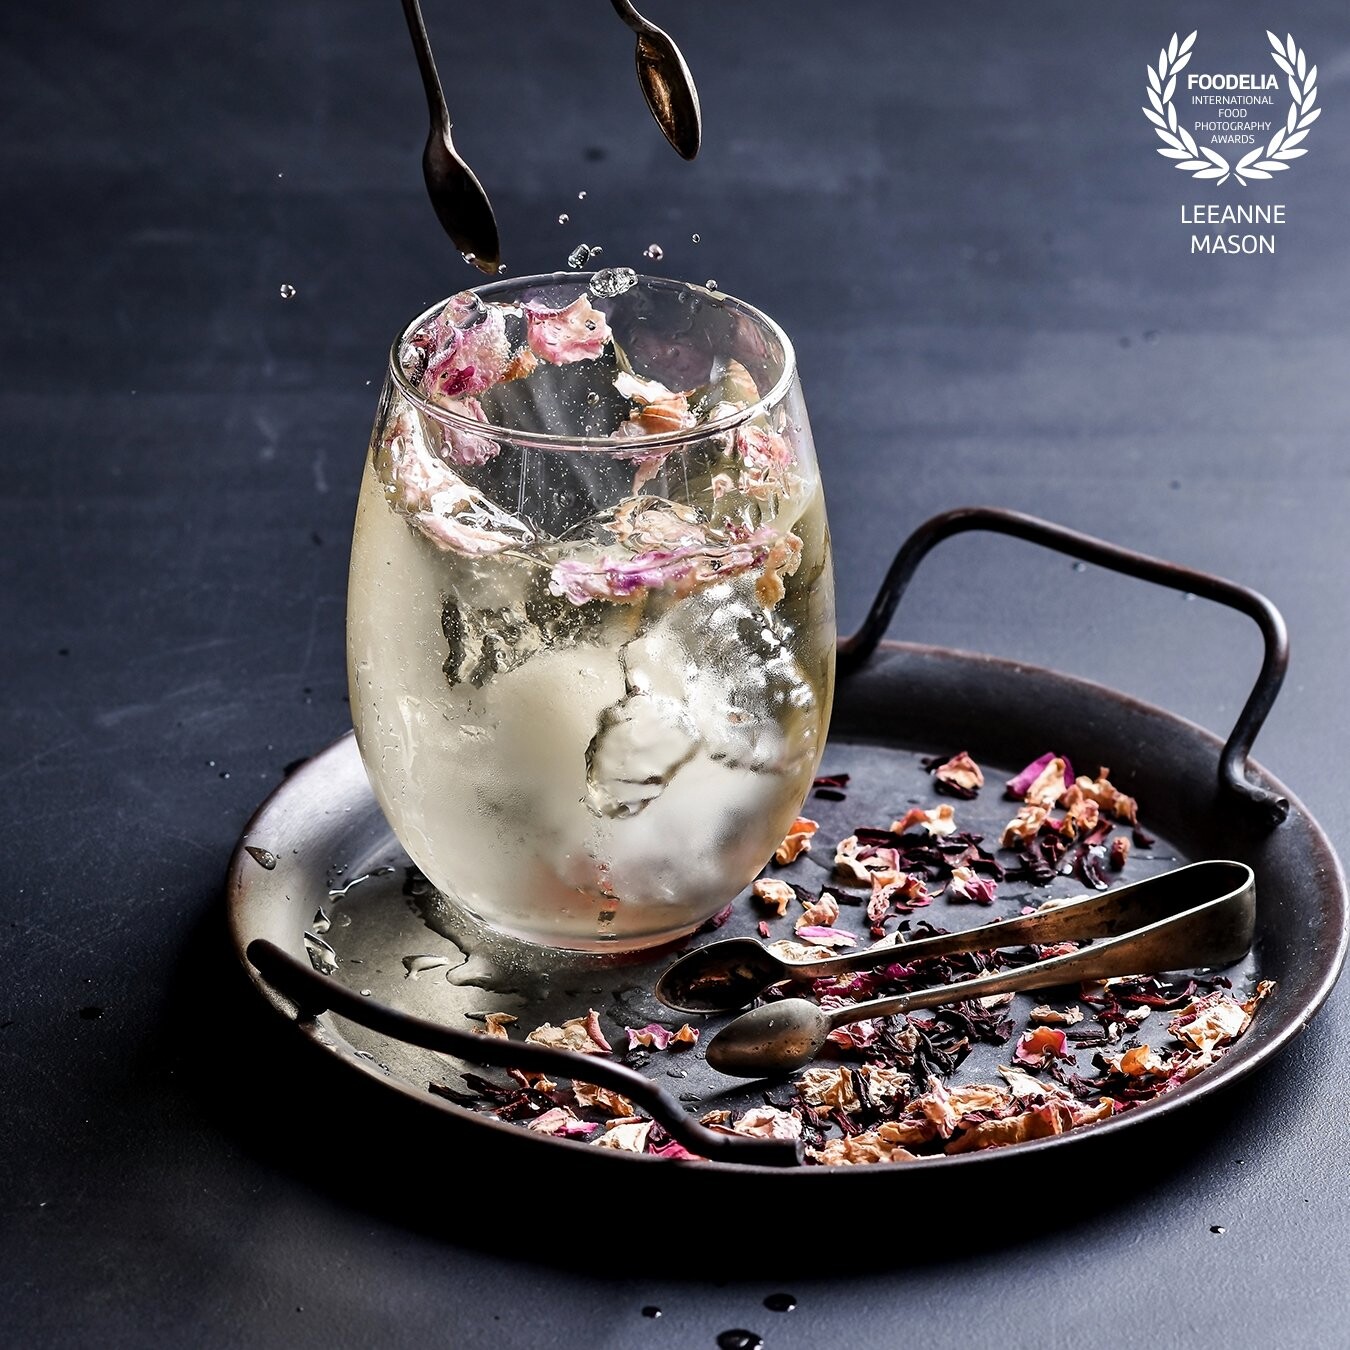 I created this Drinks Splash image with a Godox AD300 from behind and slightly off to the side.  I used Altina Drinks non alcoholic white wine and ice cubes containing rose petals as the subject and by using continuous shooting mode I had a few options to choose from.